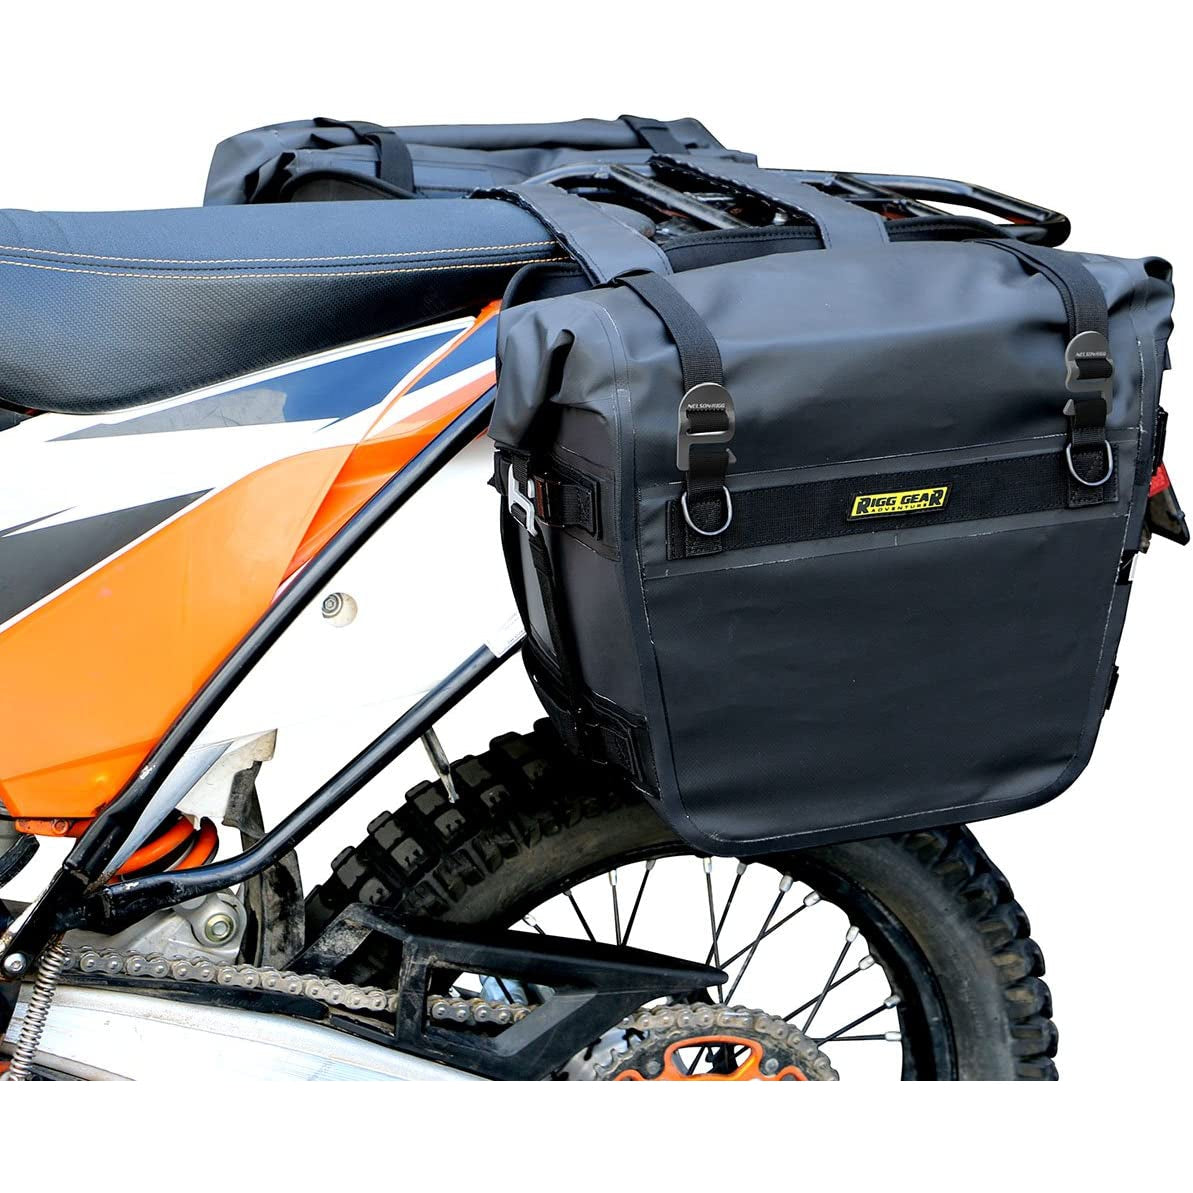 Rigg Gear Adventure SE-3050 Deluxe Adventure Motorcycle Dry Saddlebags